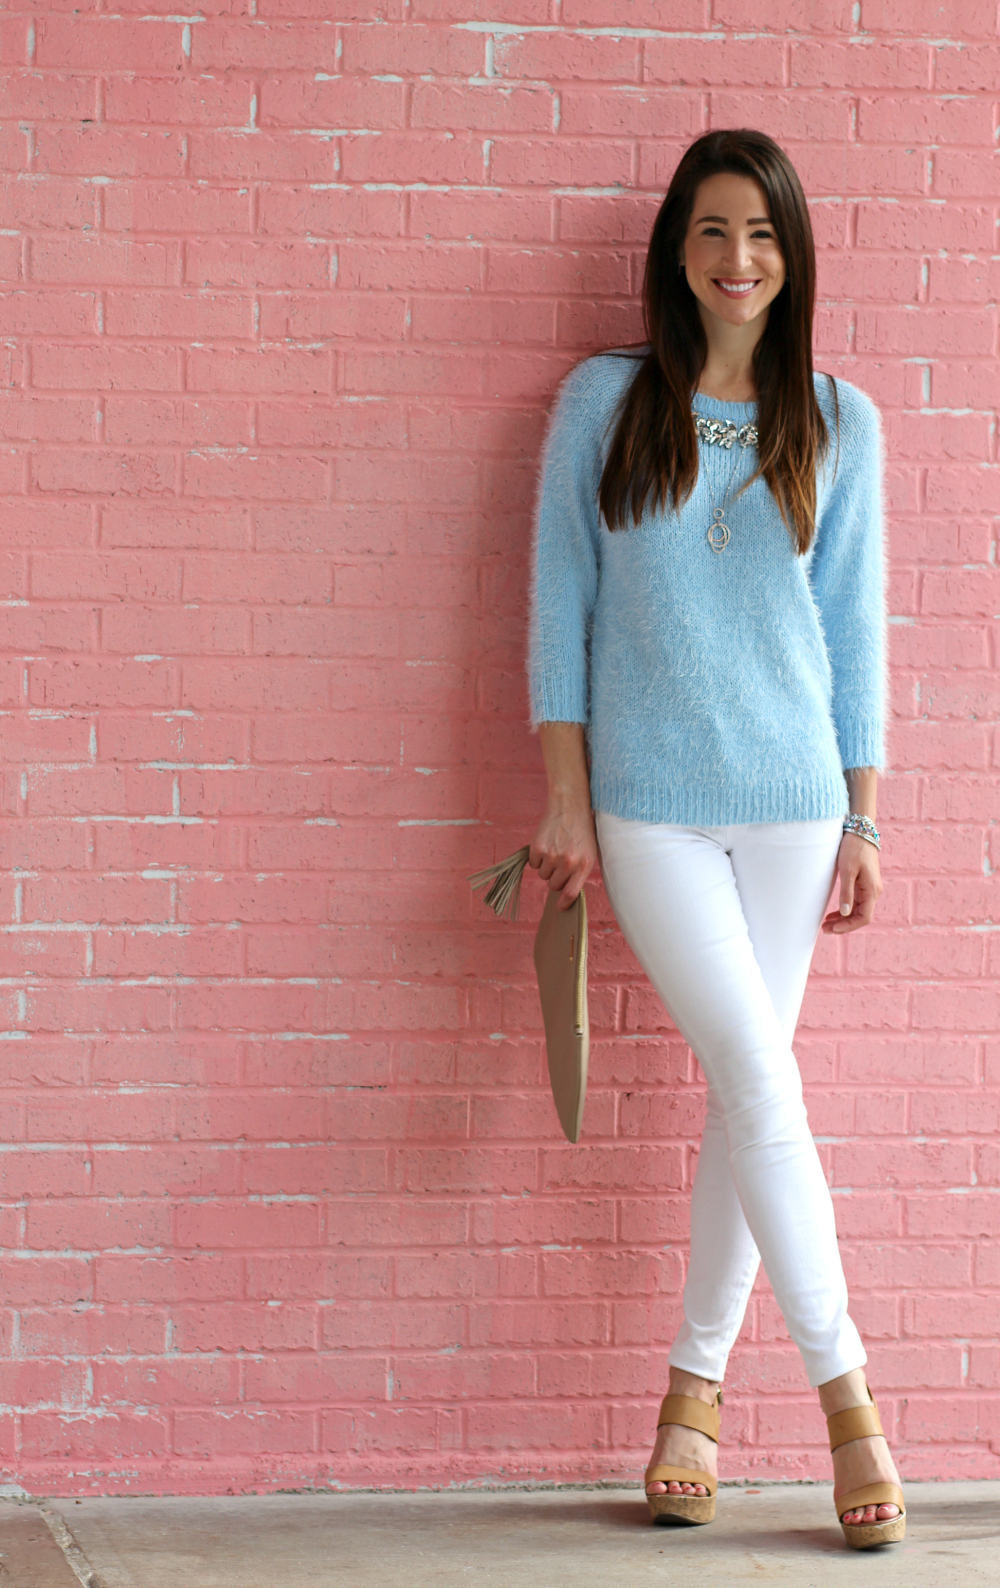 Periwinkle Sweater, Bejeweled Sweater, Baby Blue Sweater, PAIRIE Jewelry, Blue Jewelry, Jewelry Giveaway, Giveaway, Stephanie Ziajka, Diary of a Debutante